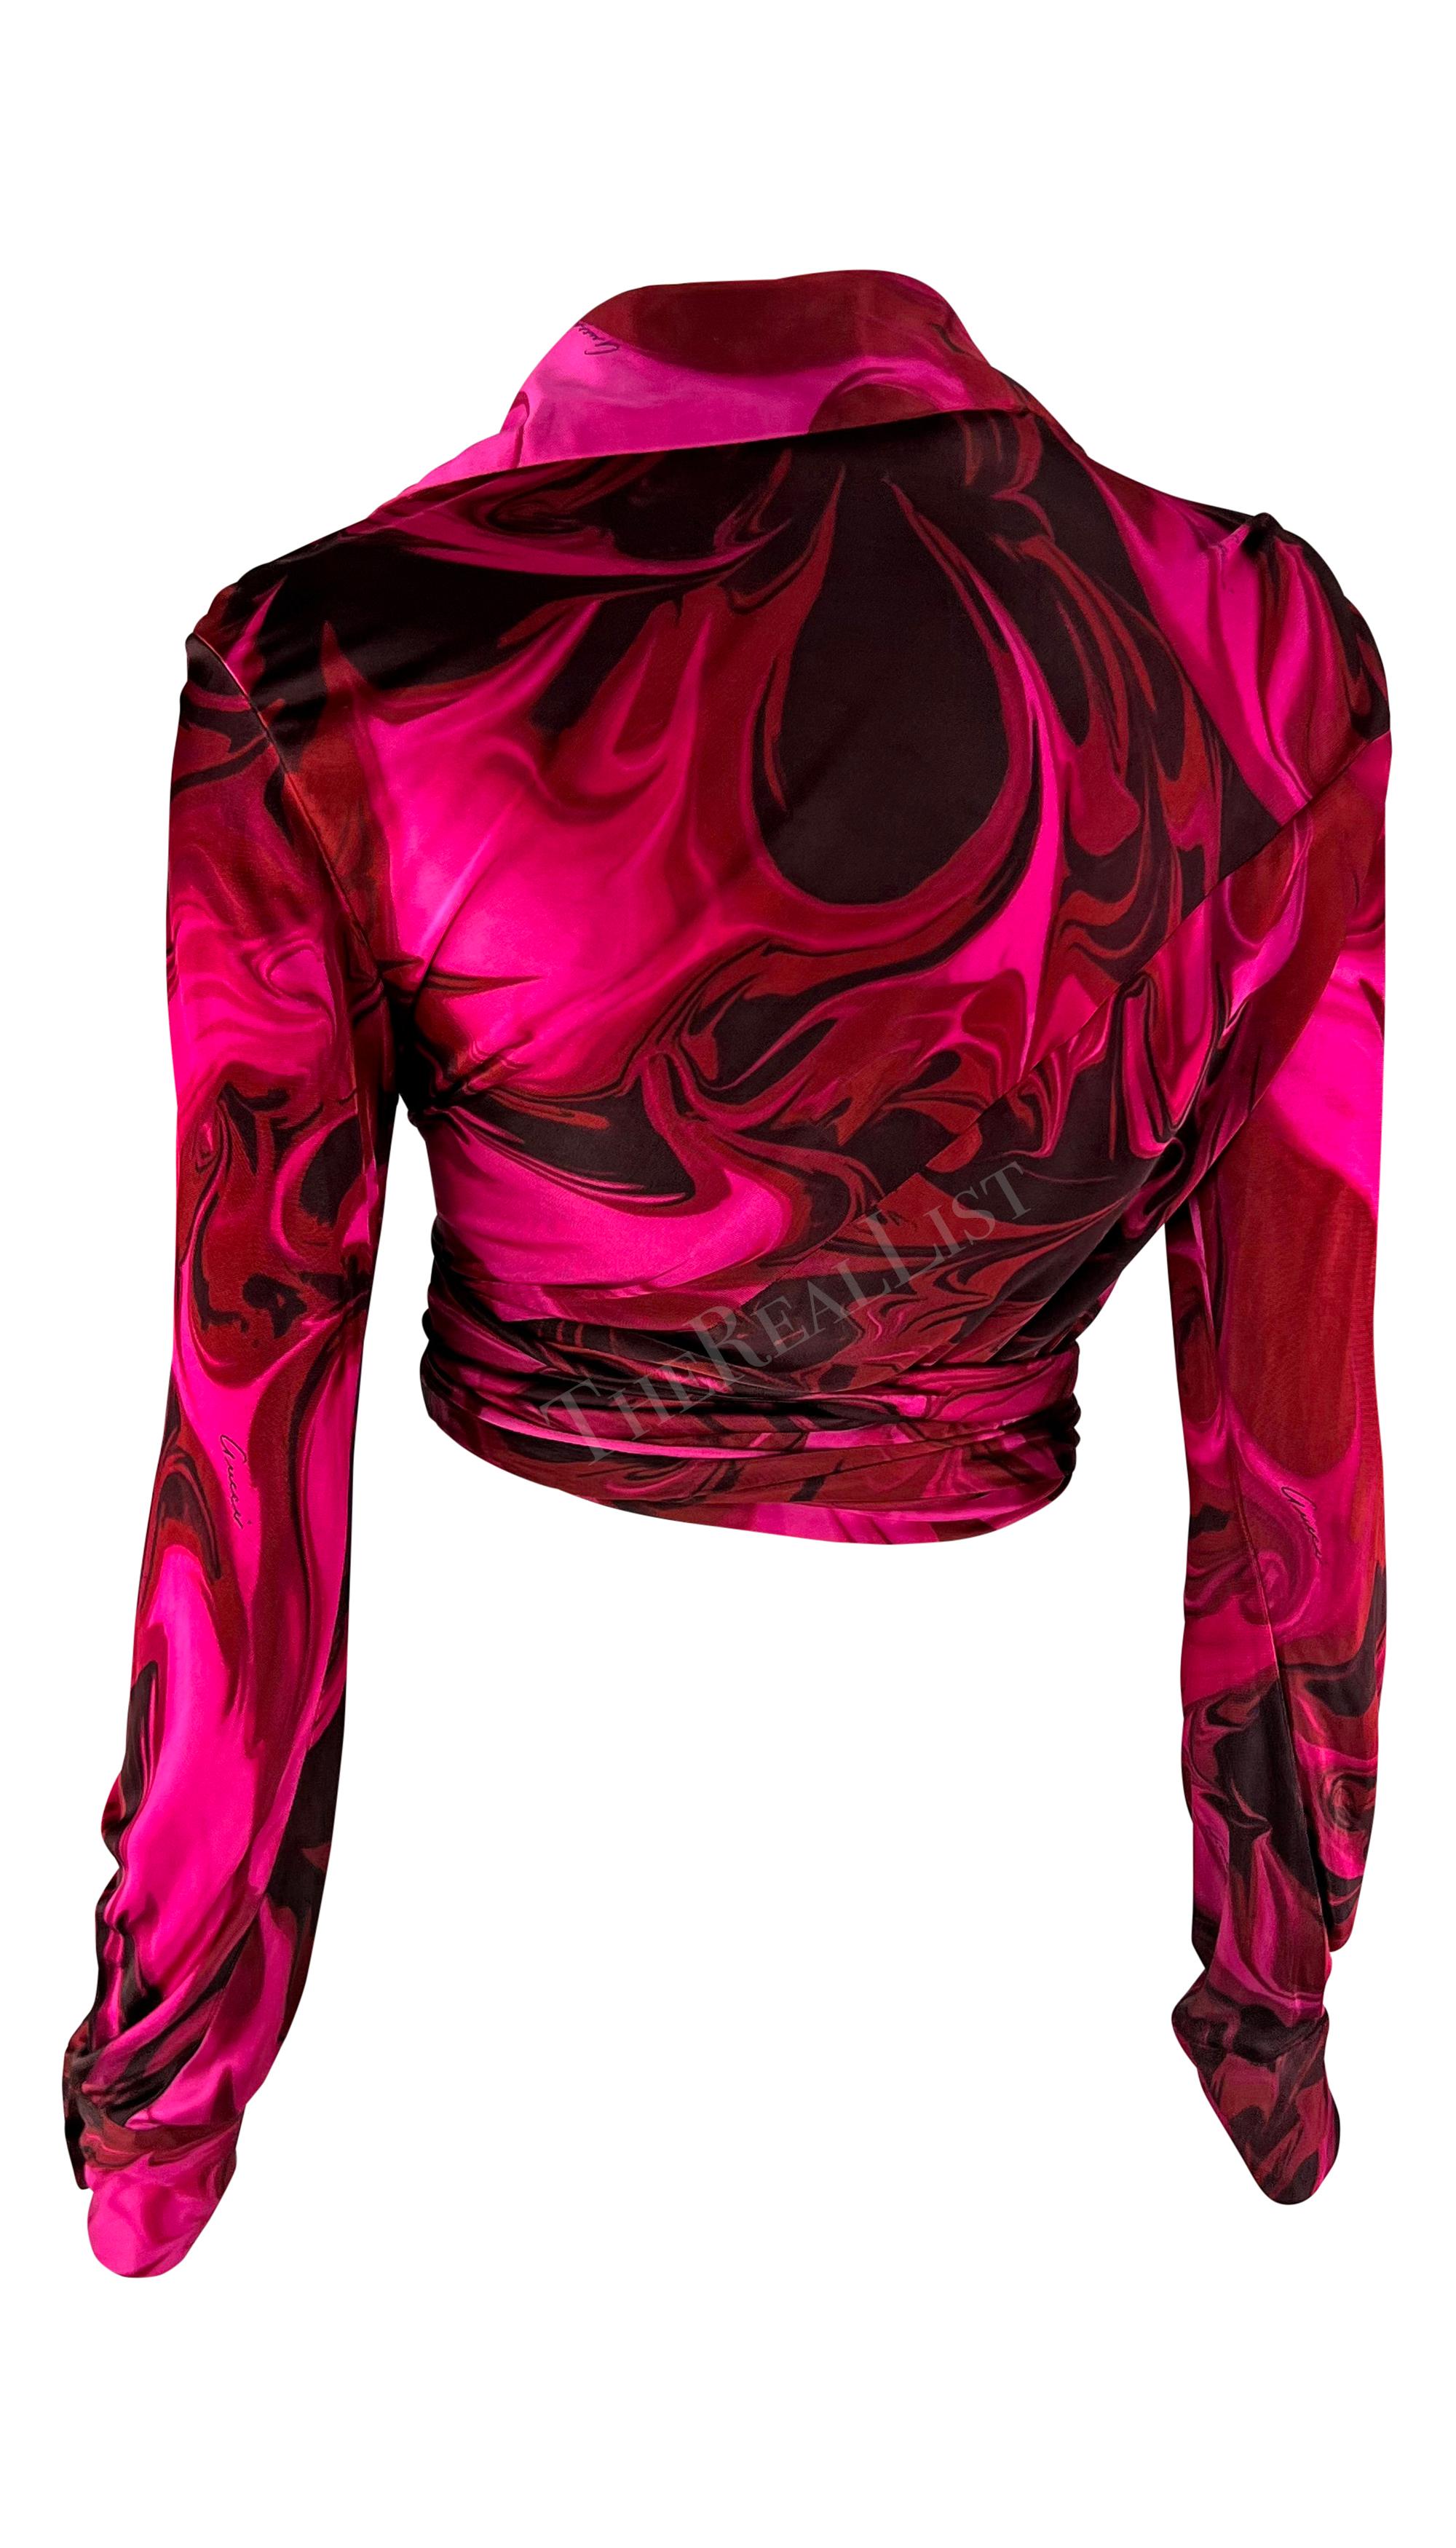 S/S 2001 Gucci by Tom Ford Pink Liquid Magma Print Wrap Blouse Crop Top For Sale 1